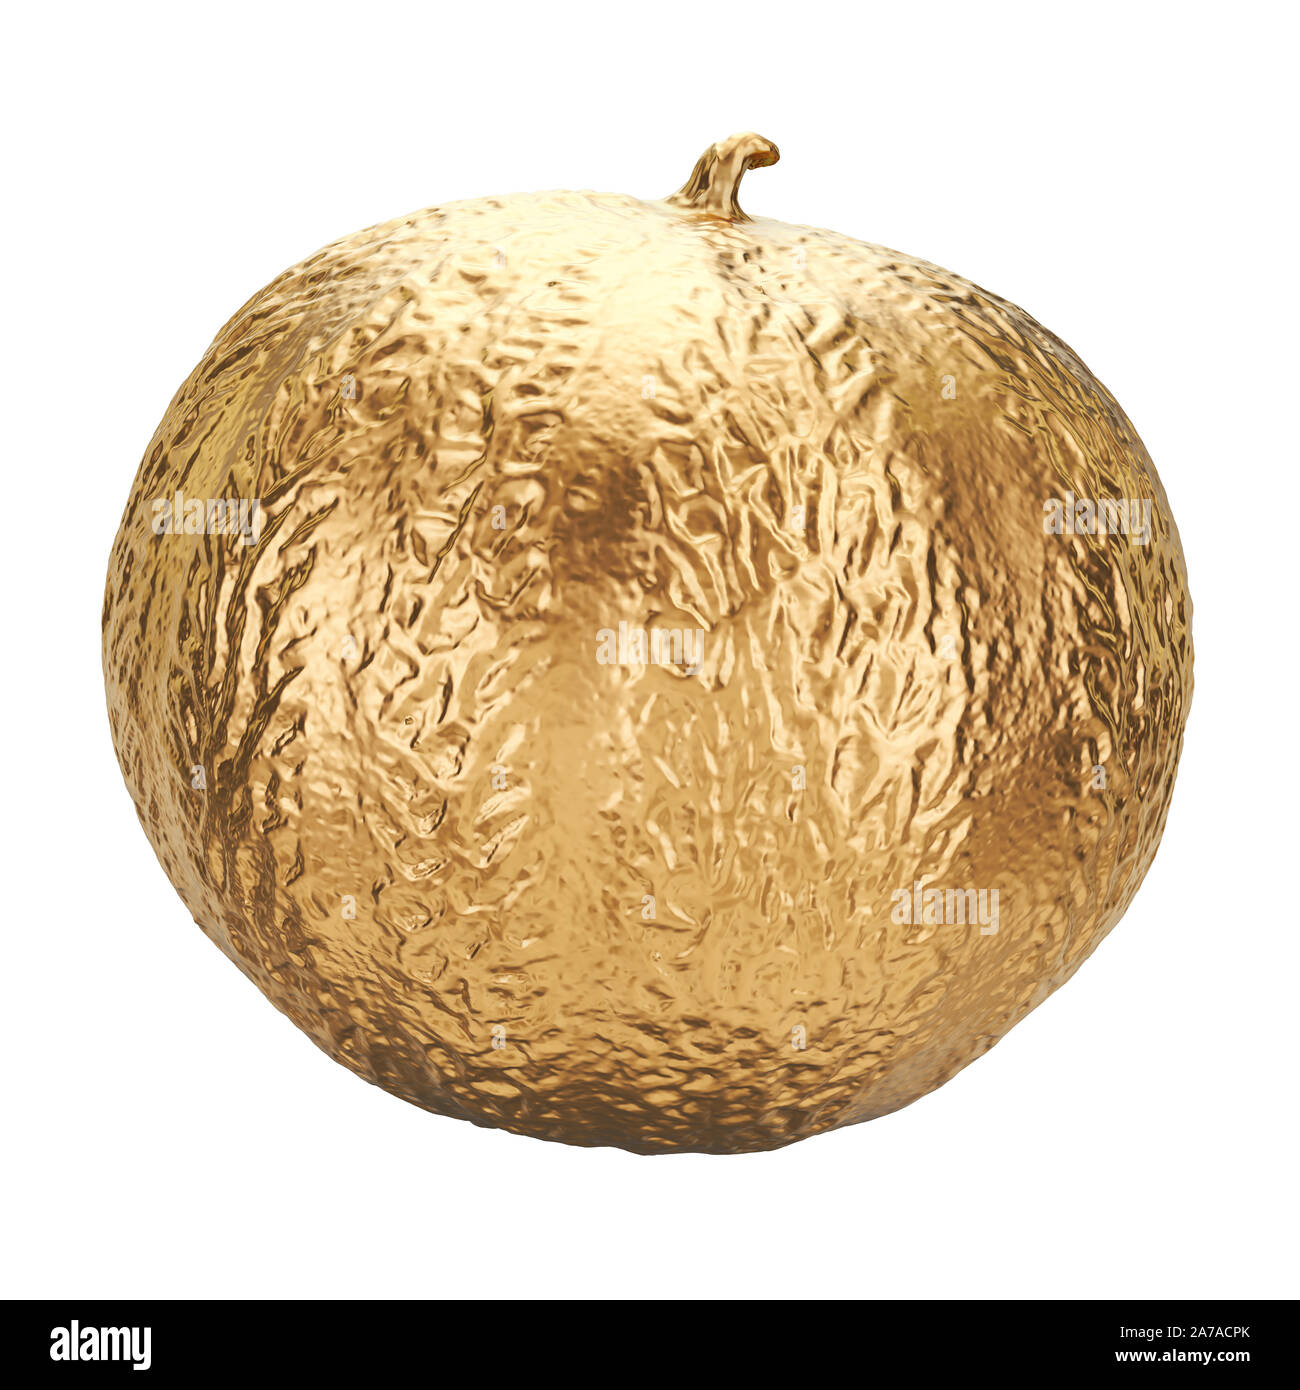 Golden charentais melon, 3d rendering isolated on white background Stock Photo